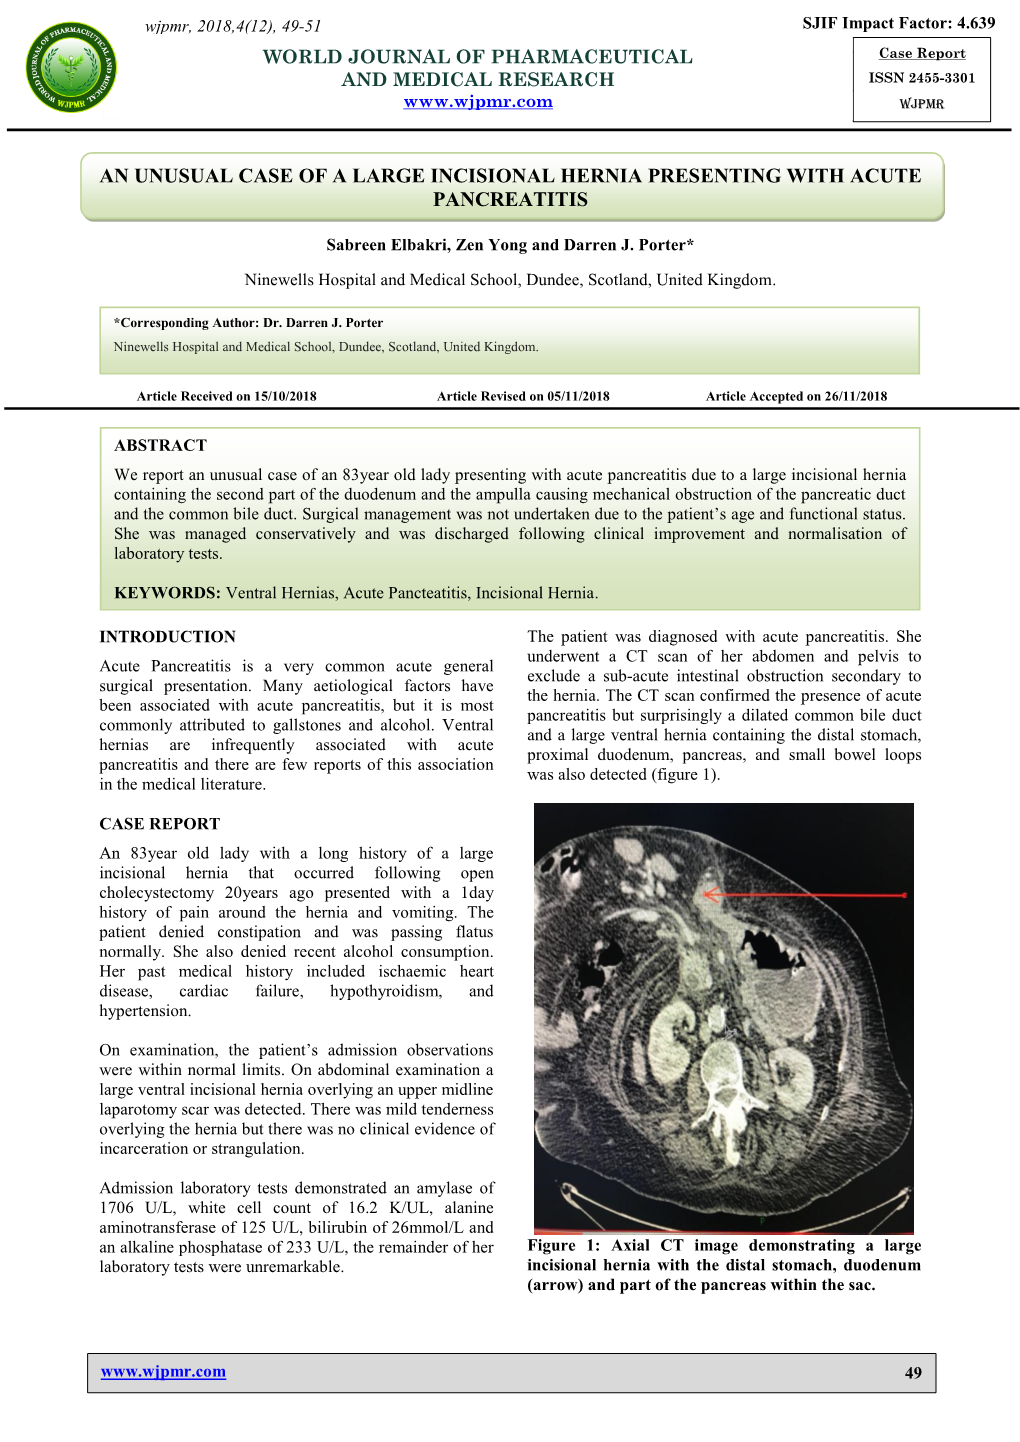 An Unusual Case of a Large Incisional Hernia Presenting with Acute Pancreatitis